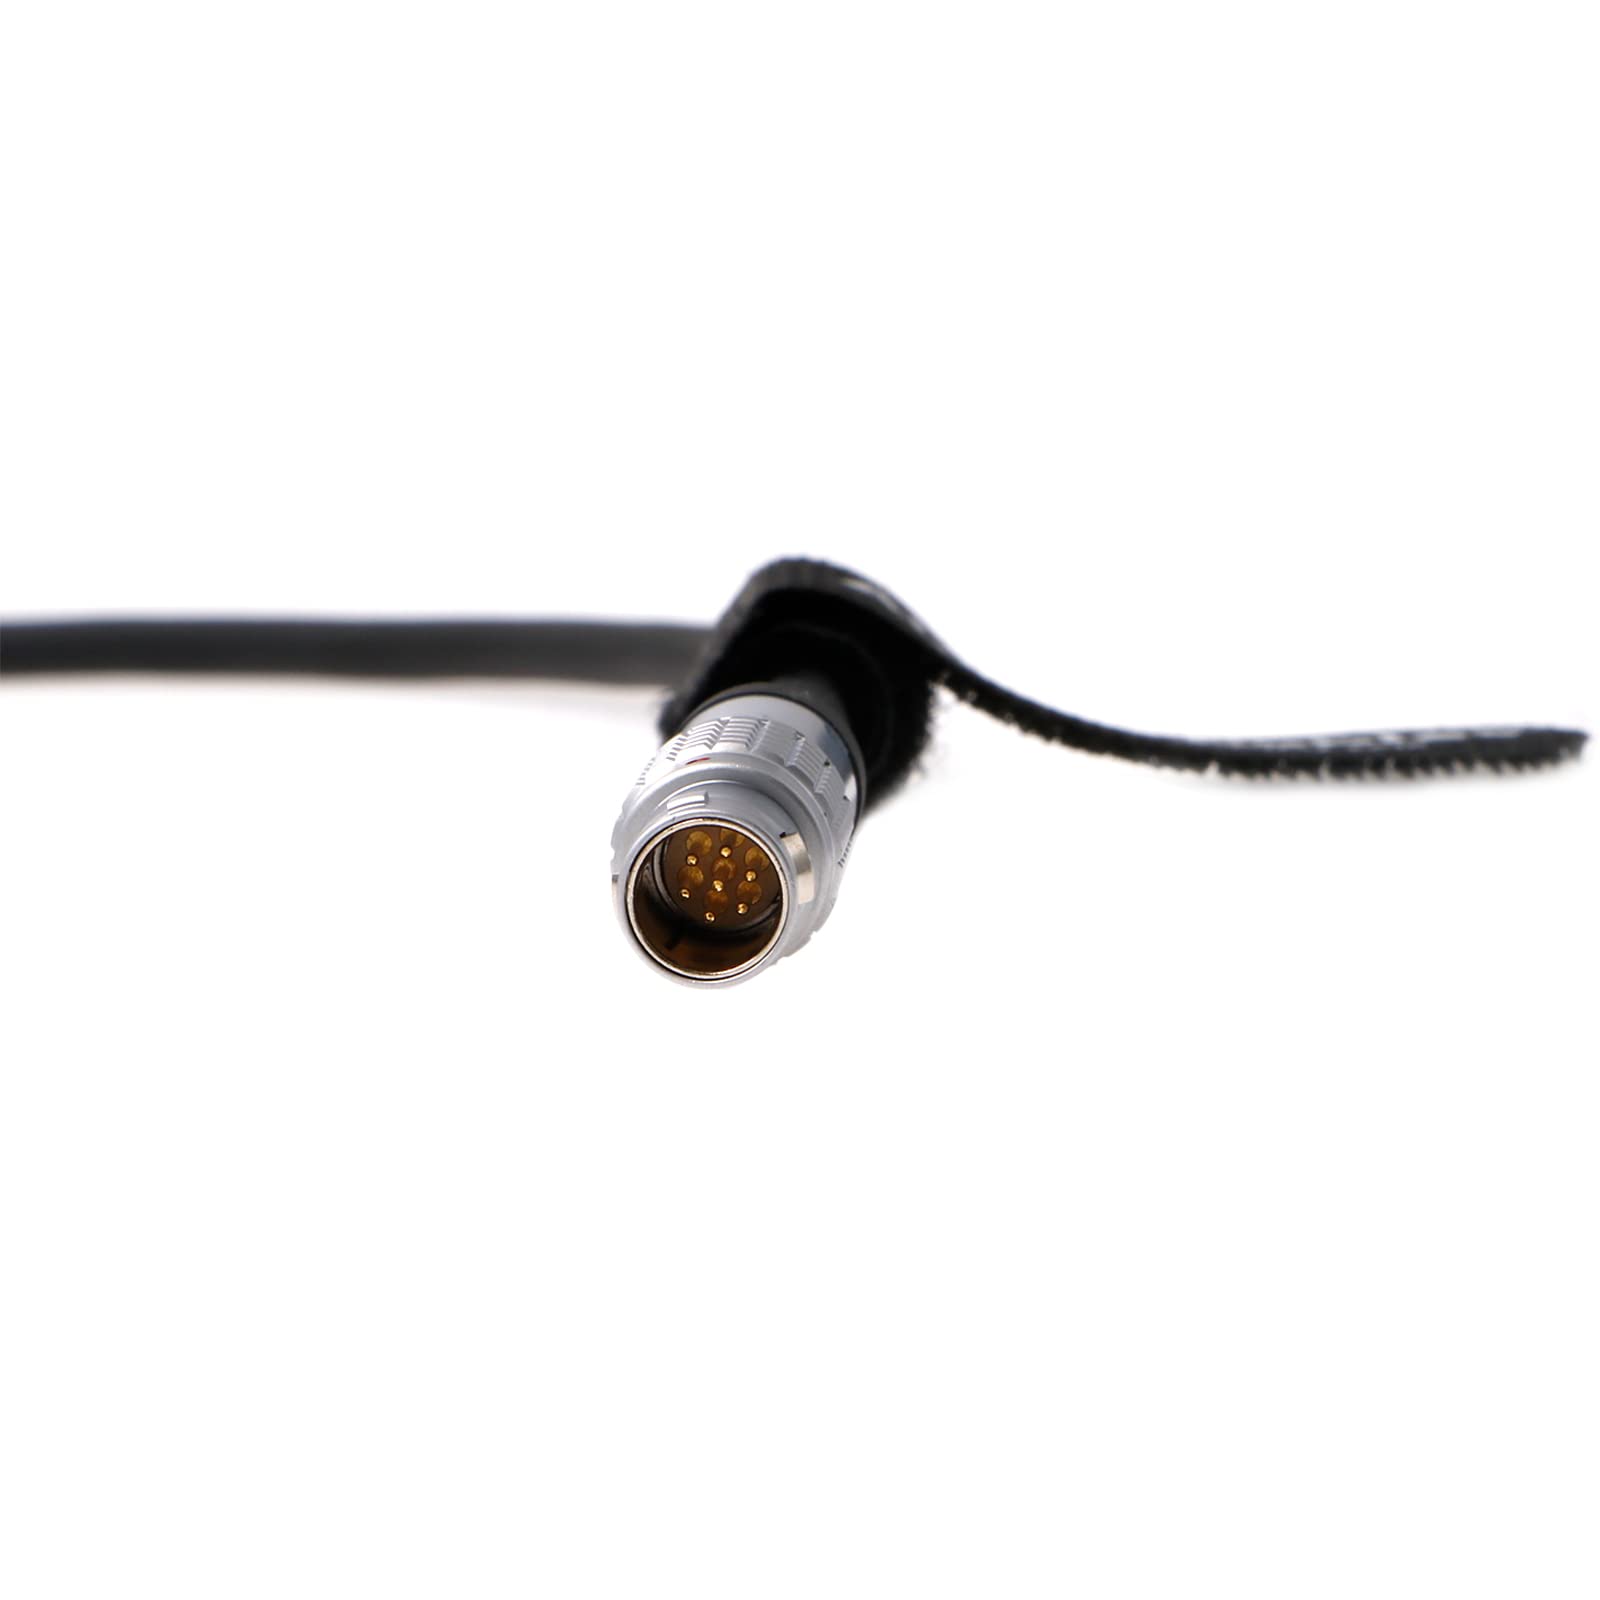 Alvin's Cables Power Control Cable for Preston Digital Micro Force and Lens Motor, ARRI Camera Compatible with Preston 1221 Y-Cable